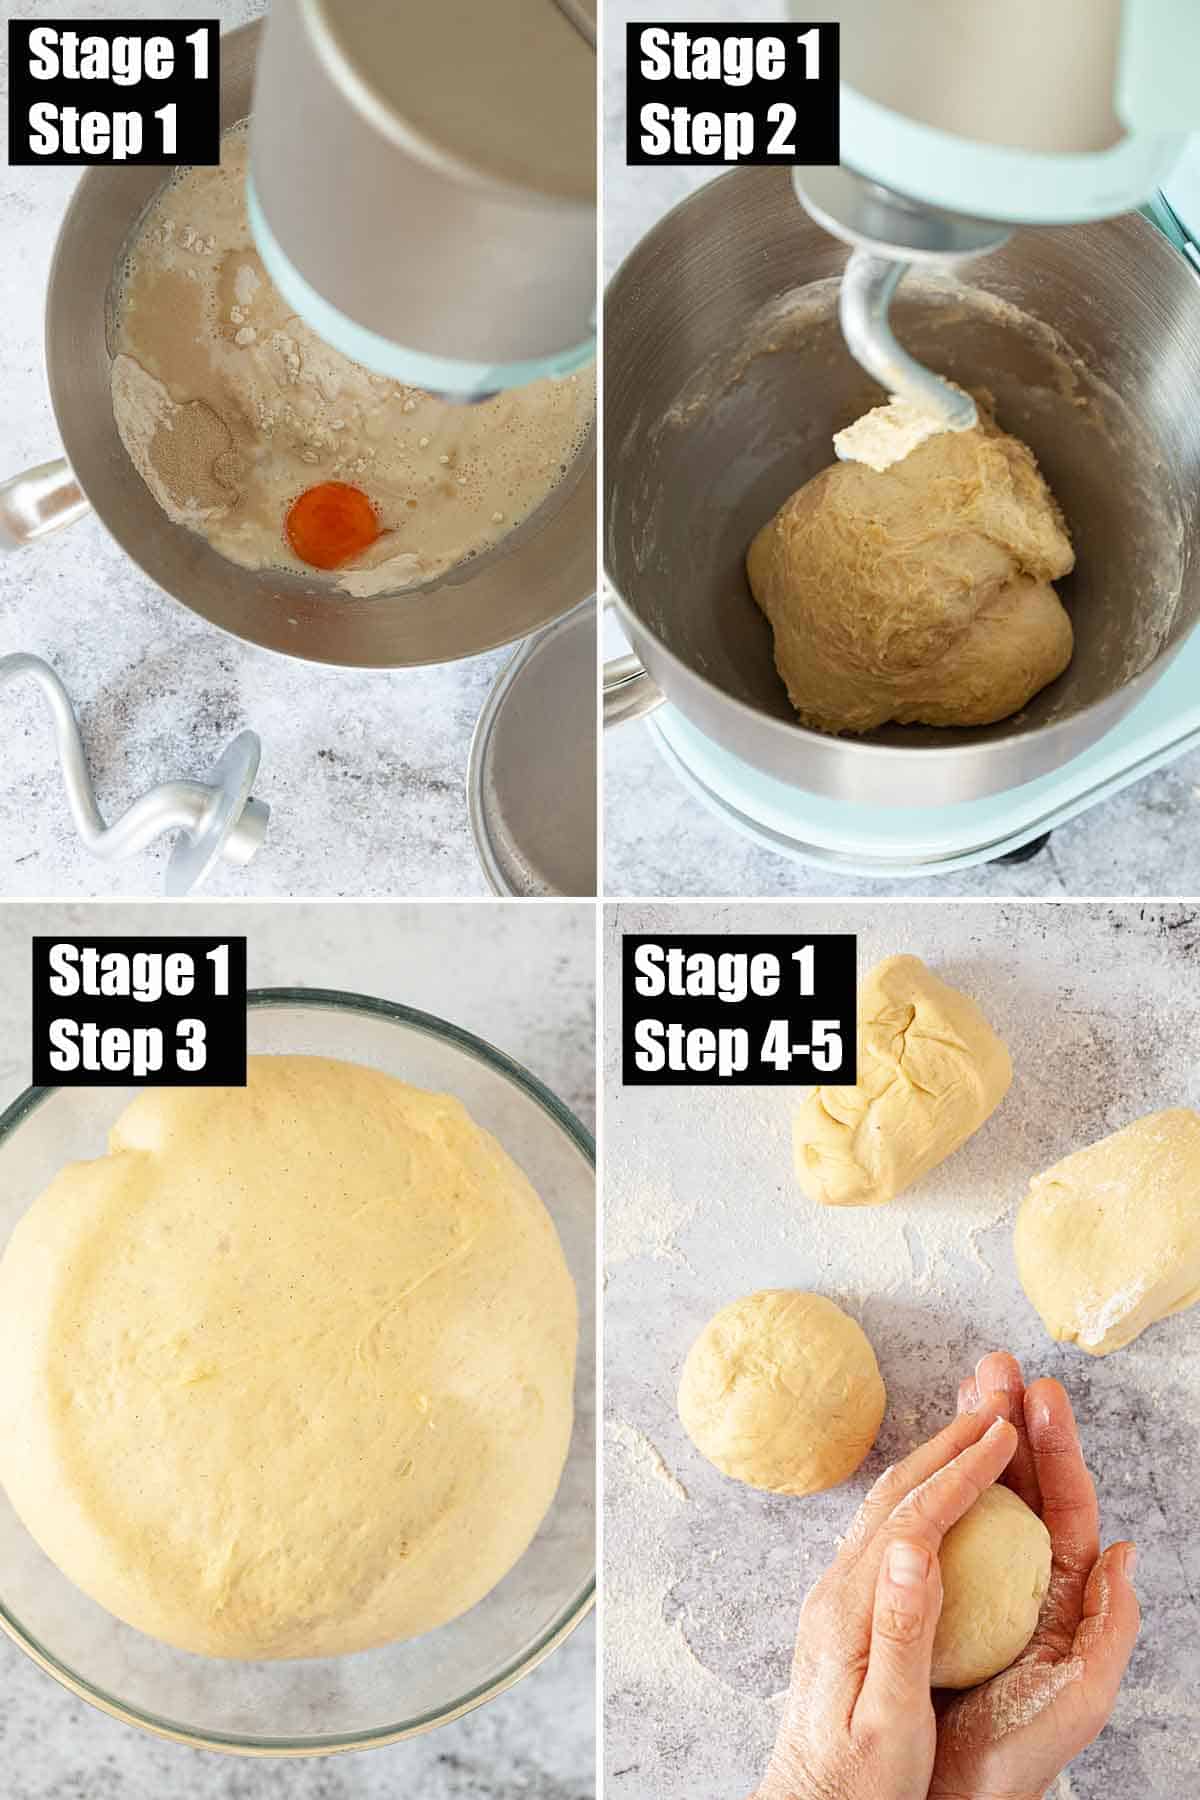 Collage of images showing enriched dough being made.